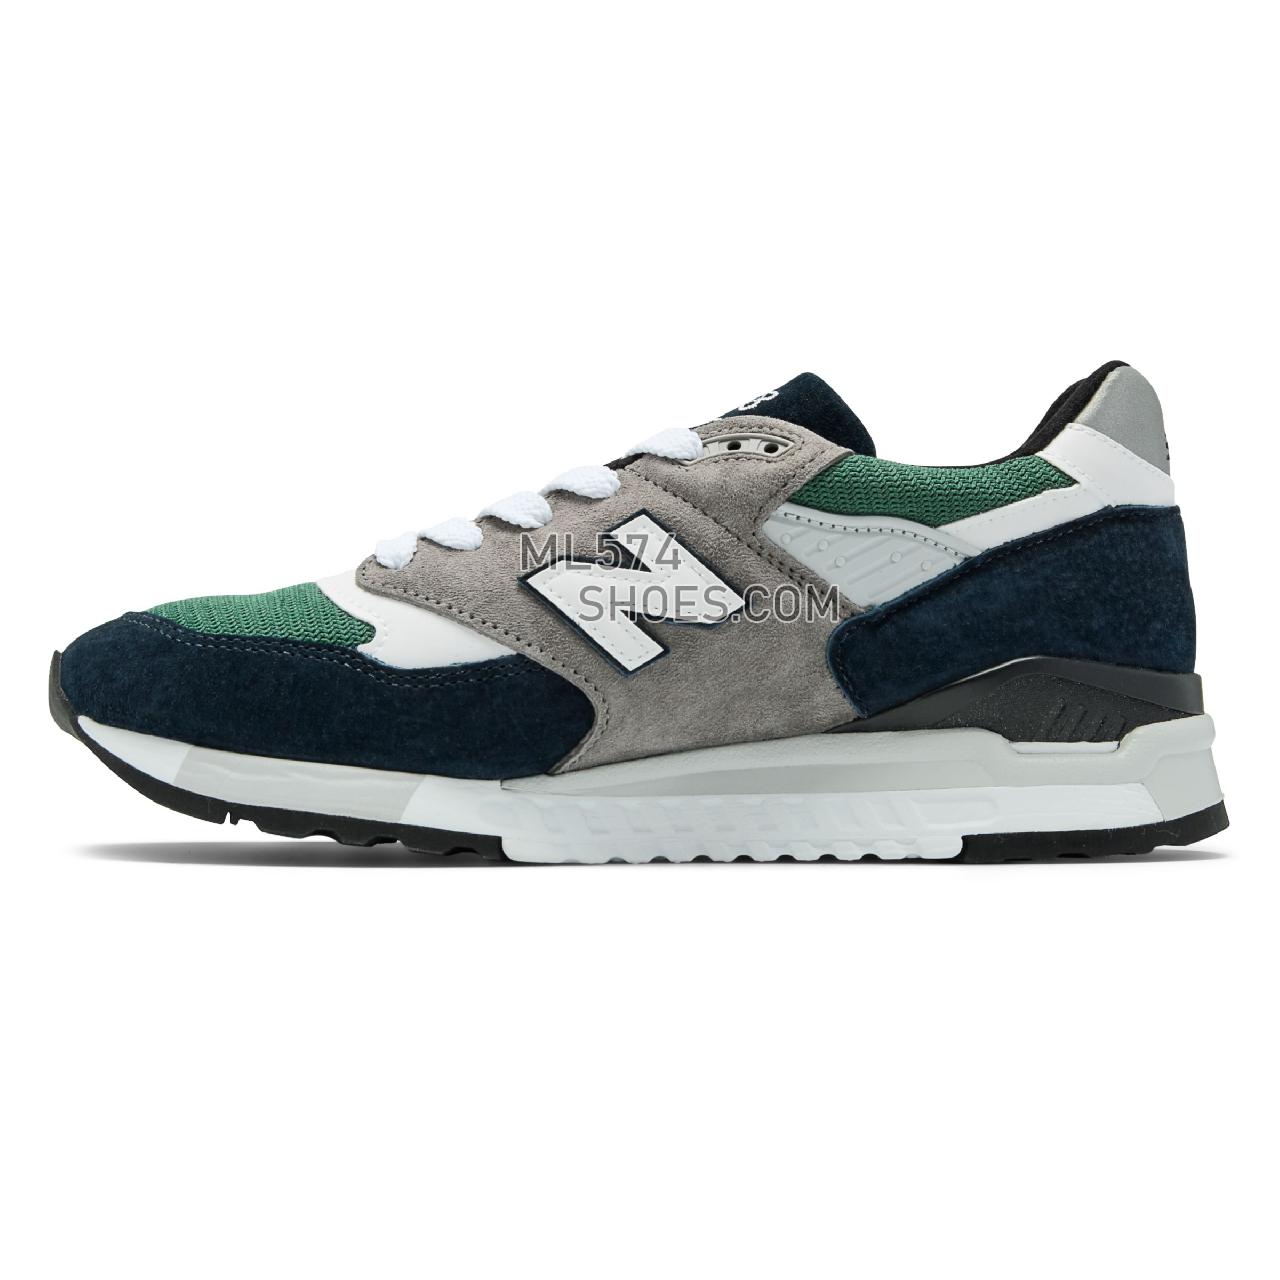 New Balance 998 Made in US - Men's 998 - Classic Galaxy with Team Forest Green - M998NL